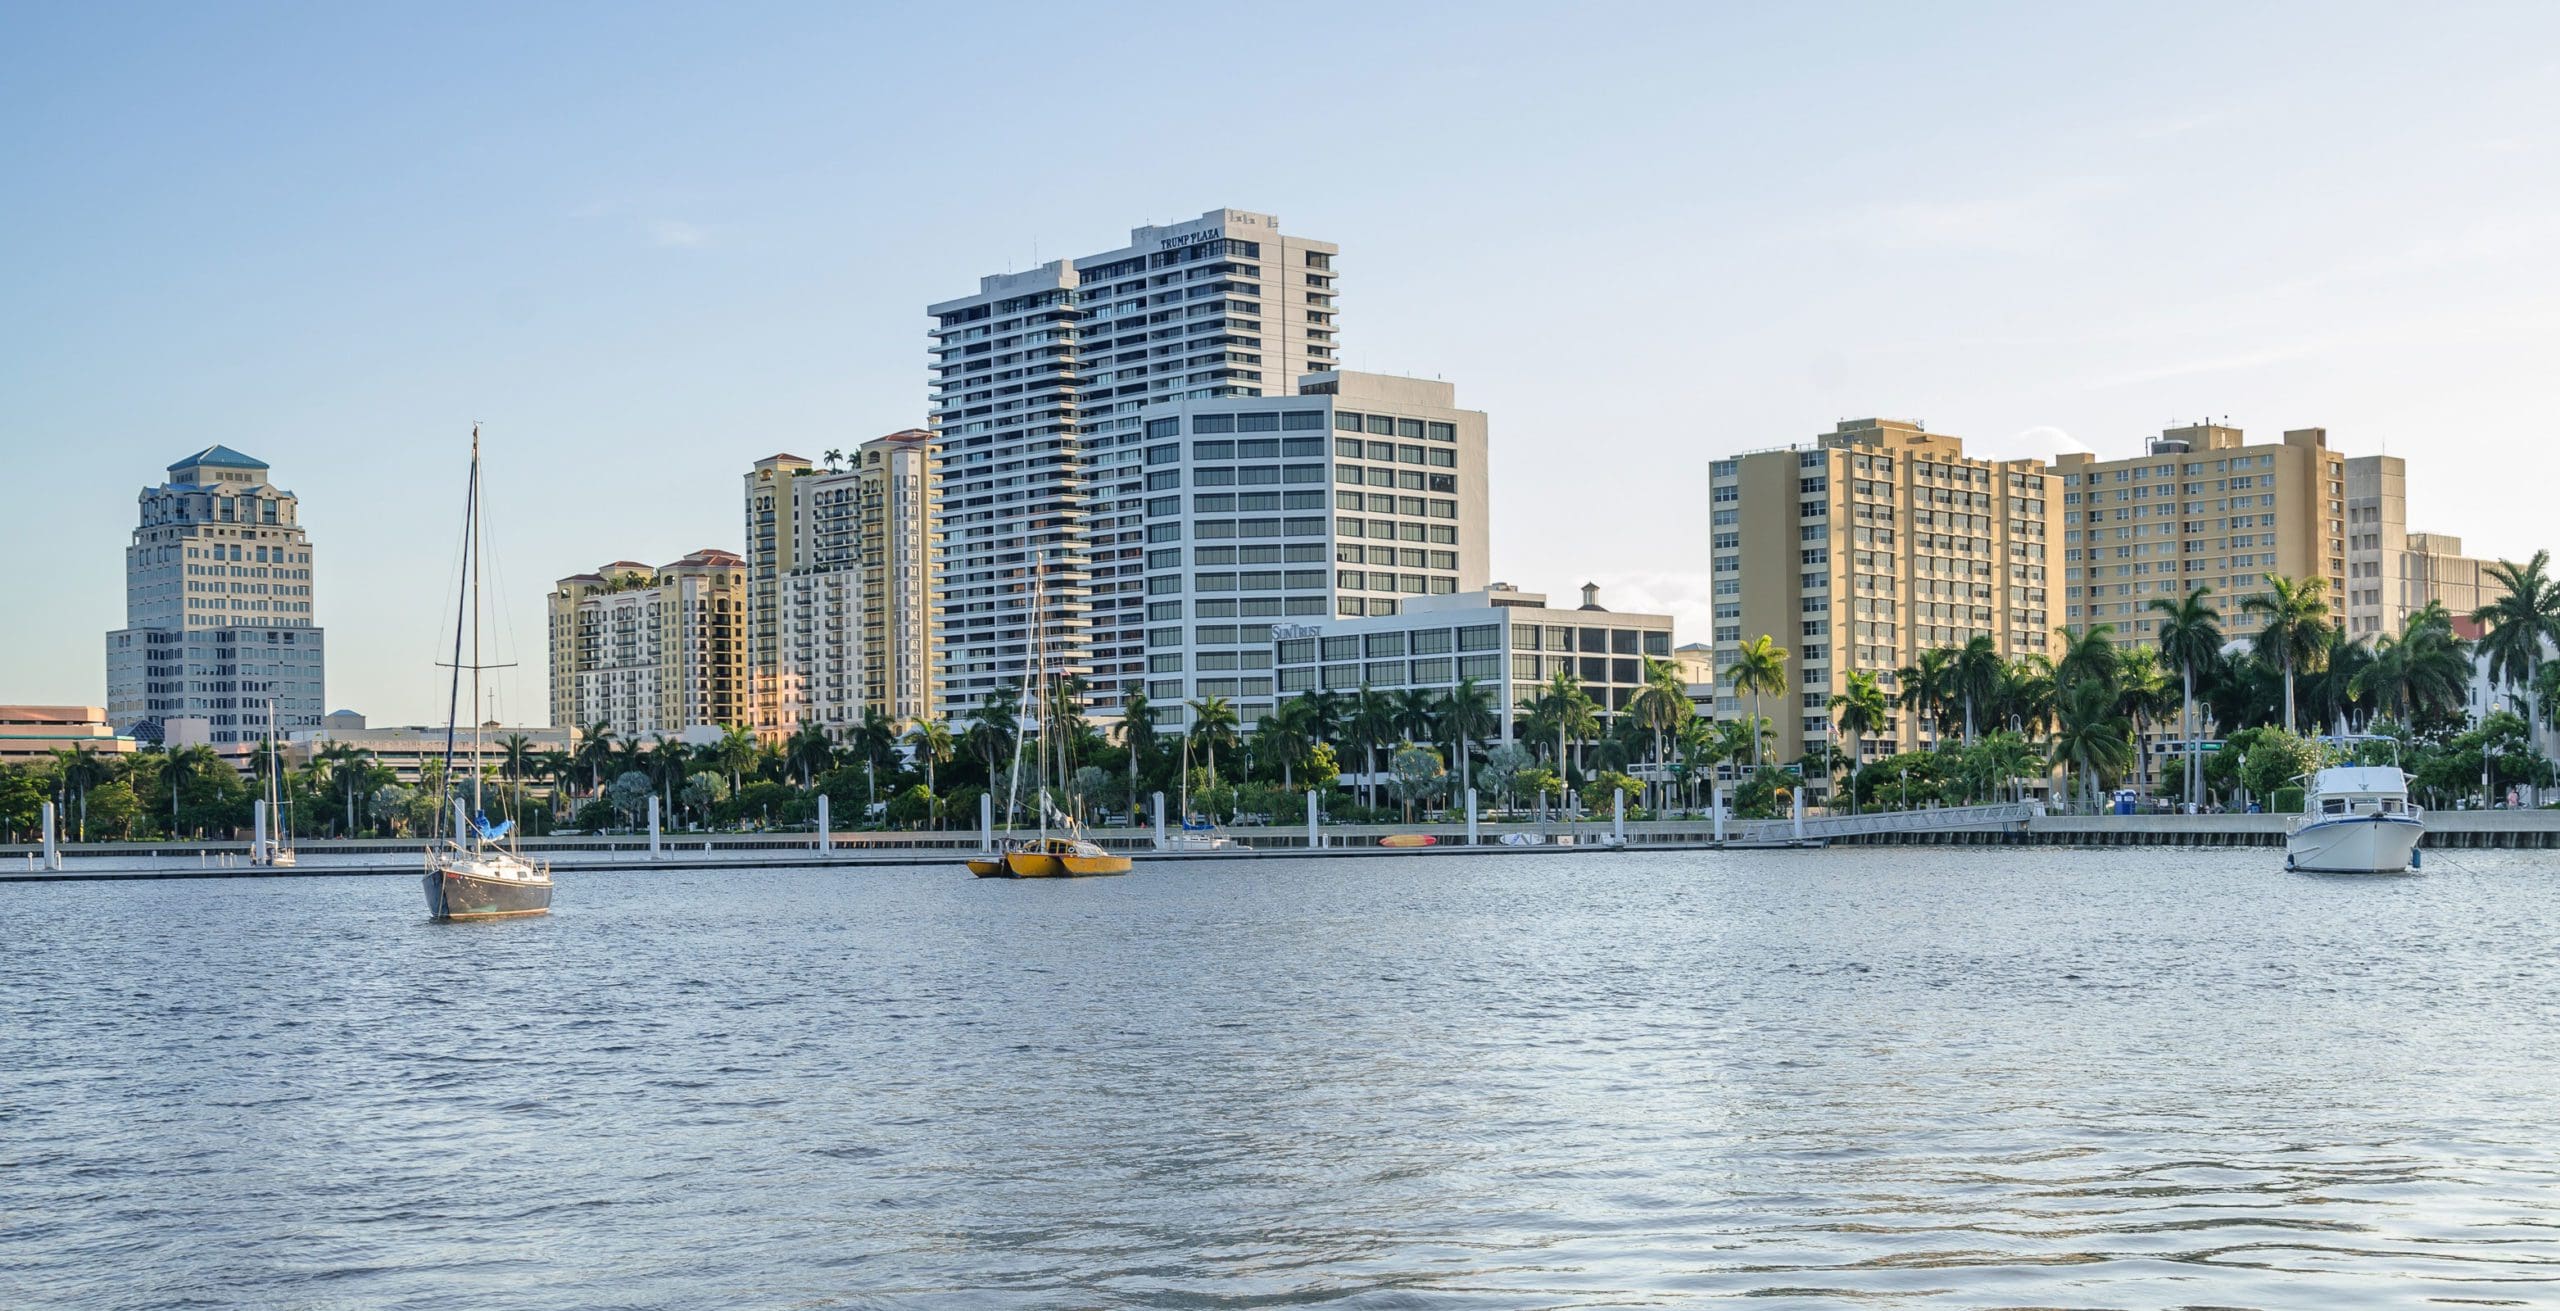 Downtown West Palm Beach viewed from the Intercostal.